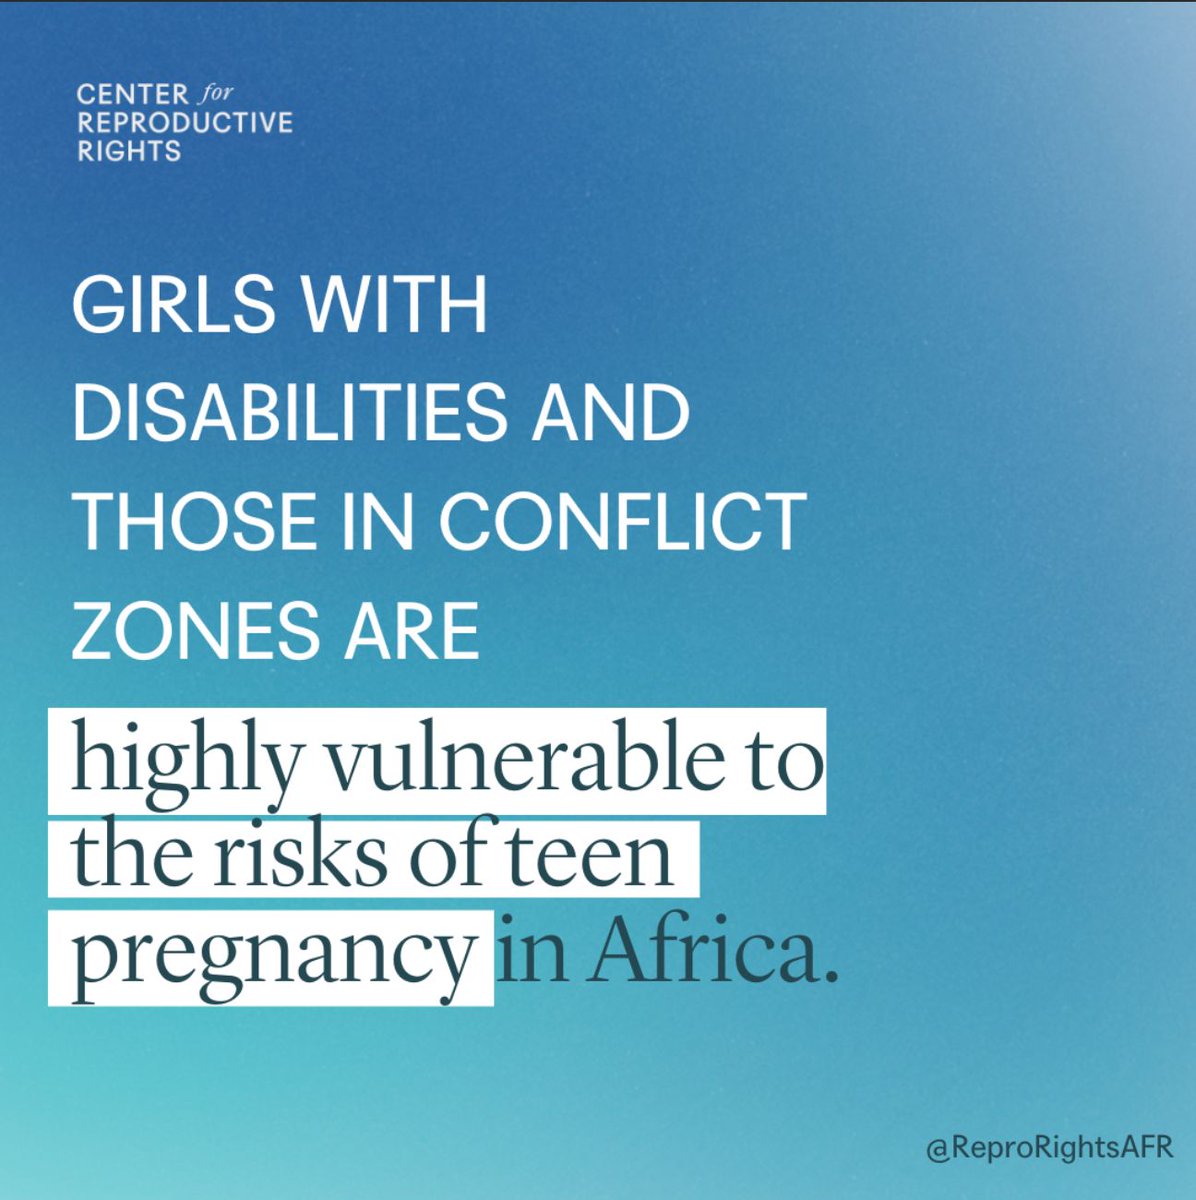 Education on contraception for teenage girls with disabilities is important so that they can protect themselves.   Read more in the ACERWC Report here: reproductiverights.org/acerwc-report-… #ACERWC43 #teenagepregnancy